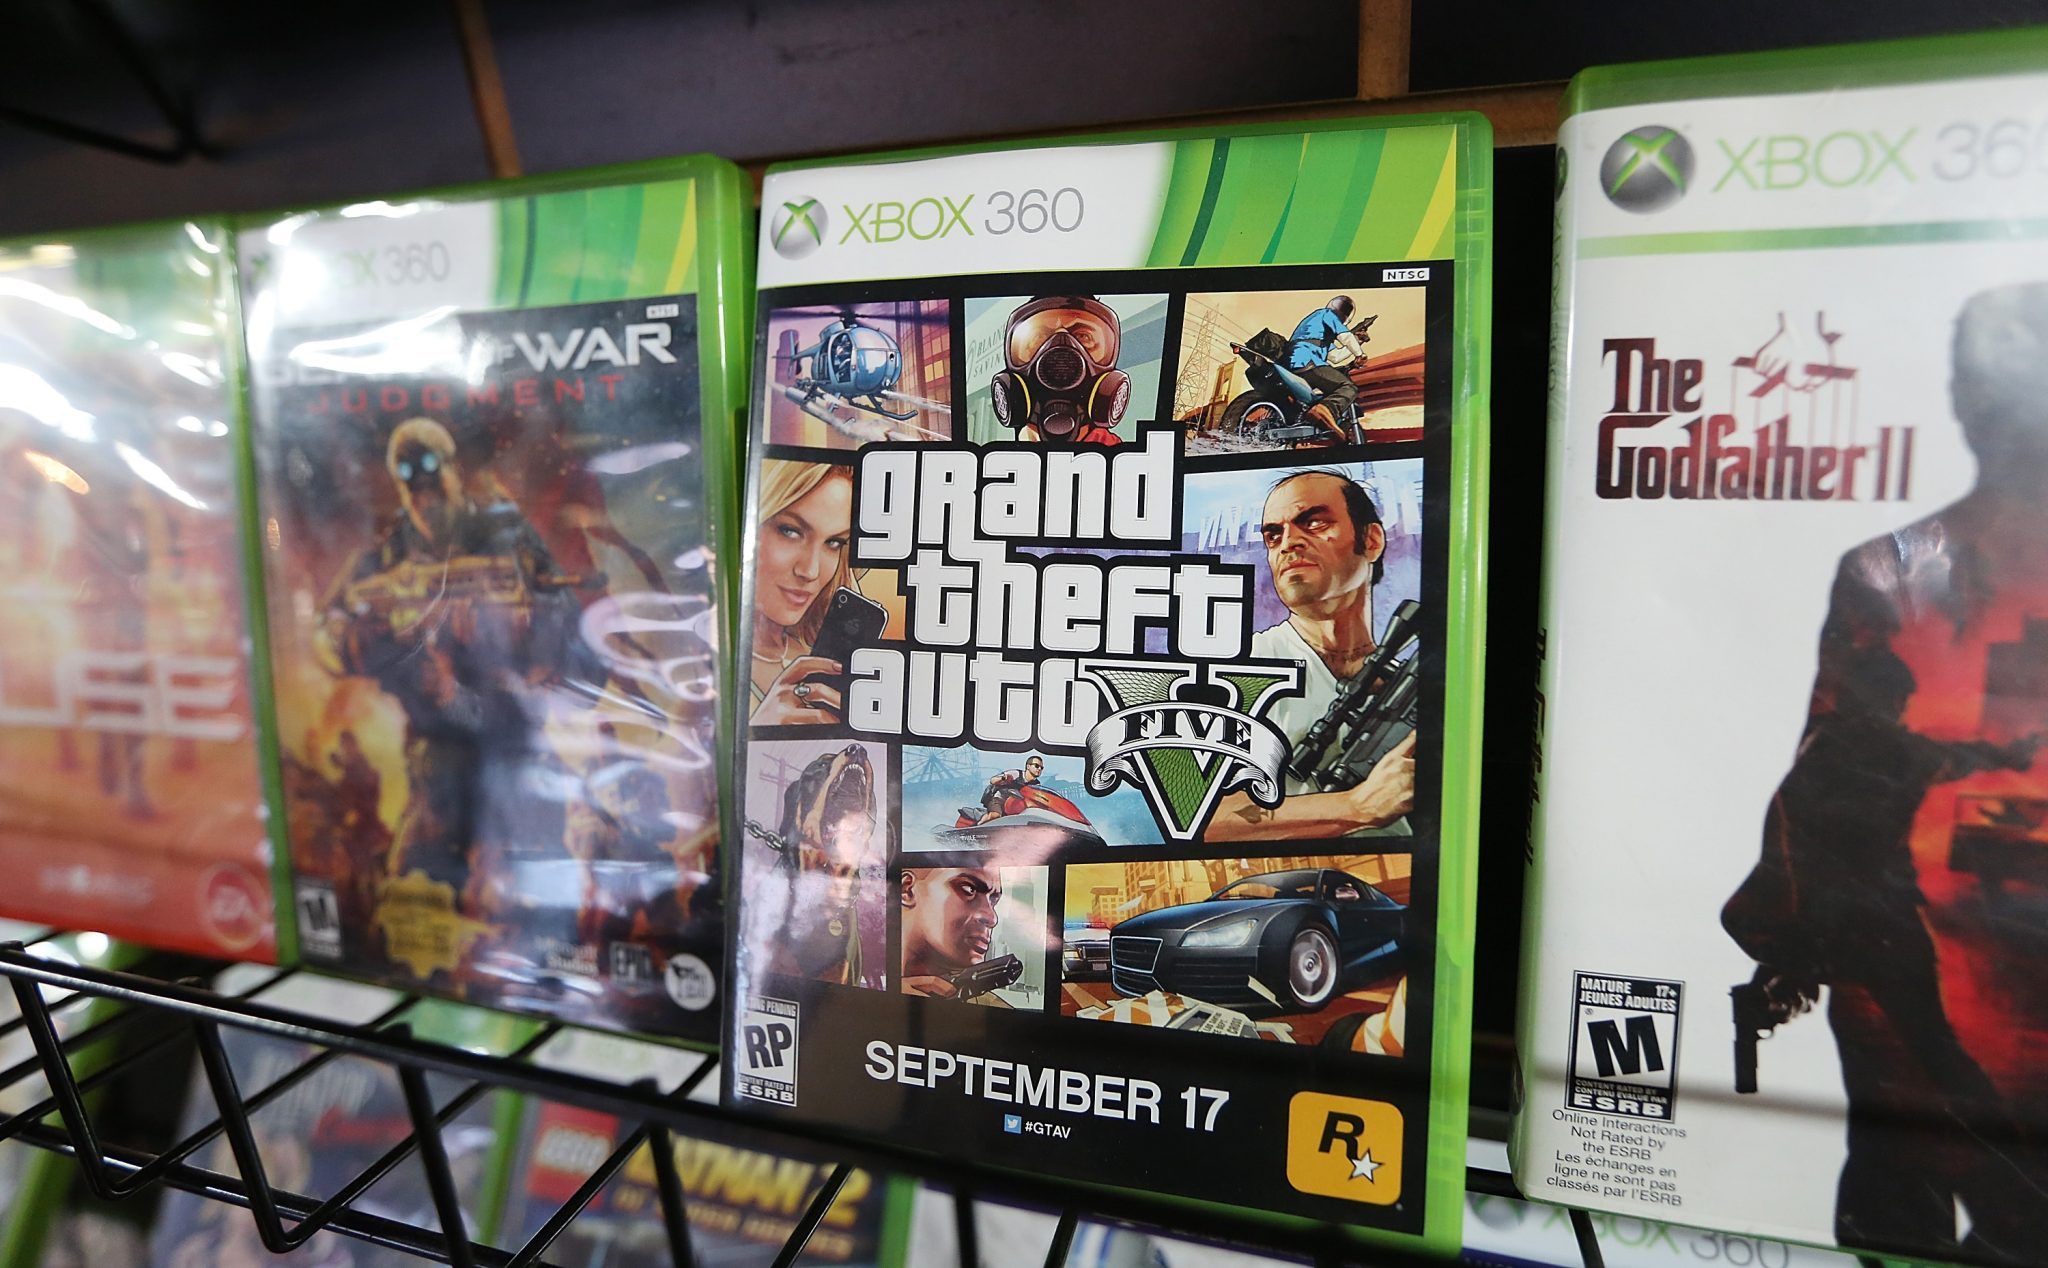 NEW YORK, NY - SEPTEMBER 18: A display copy of Grand Theft Auto V (C) sits on a shelf at the 8 Bit & Up video games shop in Manhattan's East Village on September 18, 2013 in New York City. The video game raked in more than $800 million in sales in its first 24 hours on the shelves. (Photo by Mario Tama/Getty Images)